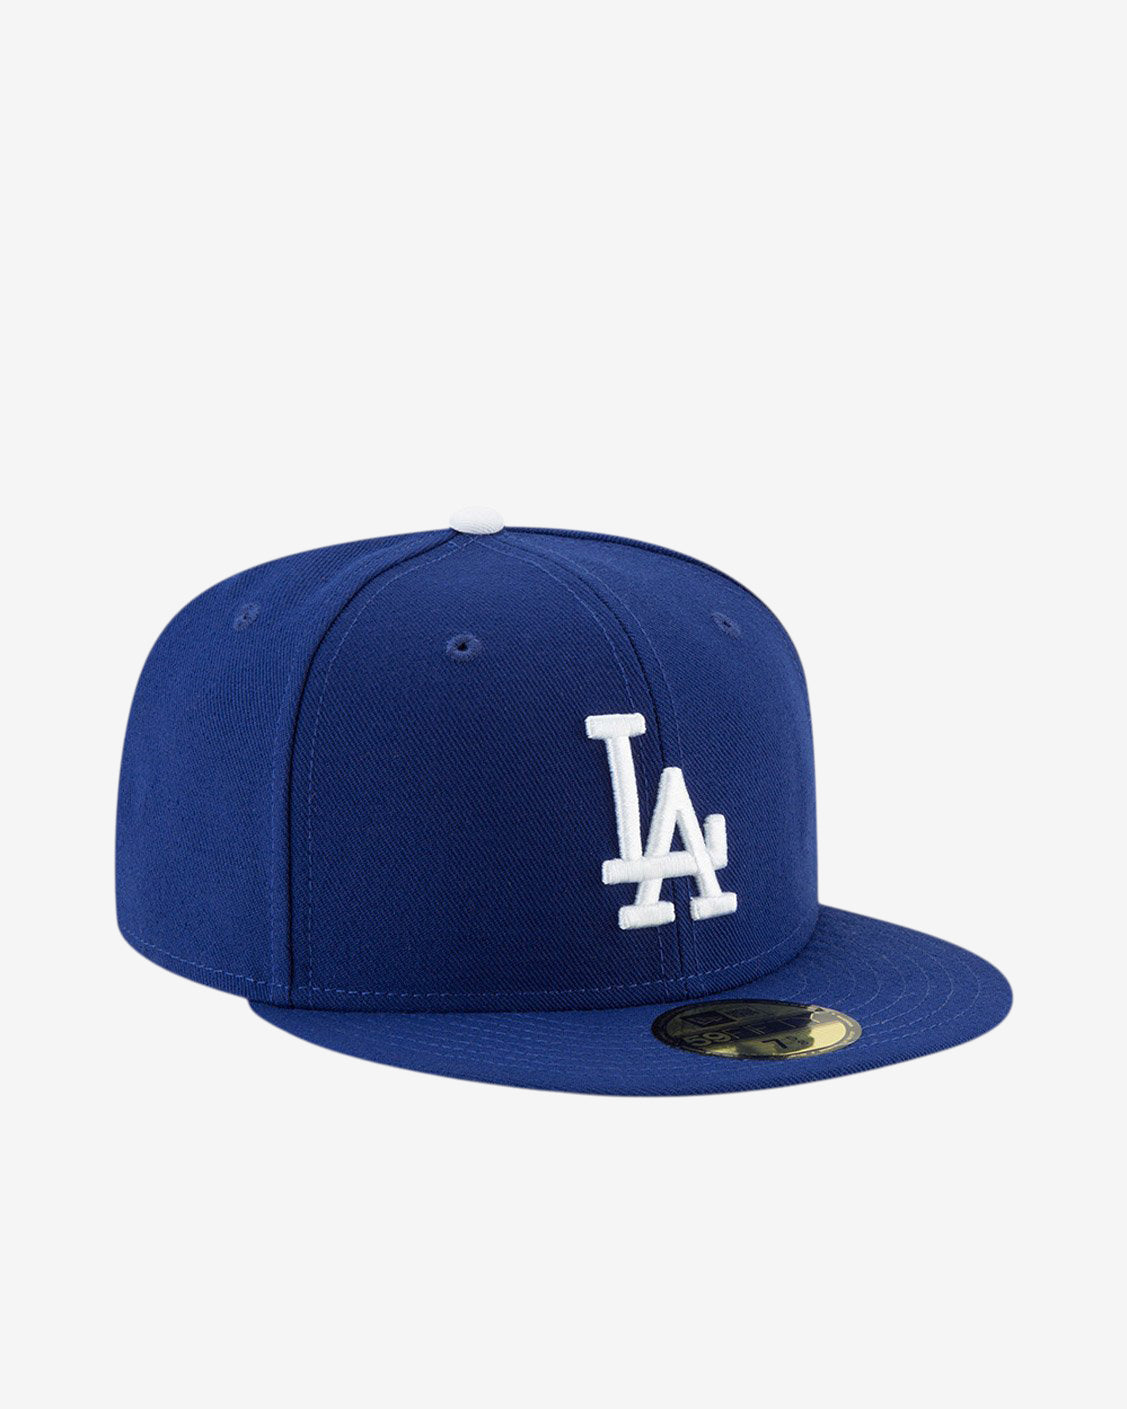 LOS ANGELES DODGERS ACPERF 59FIFTY - BLUE/WHITE